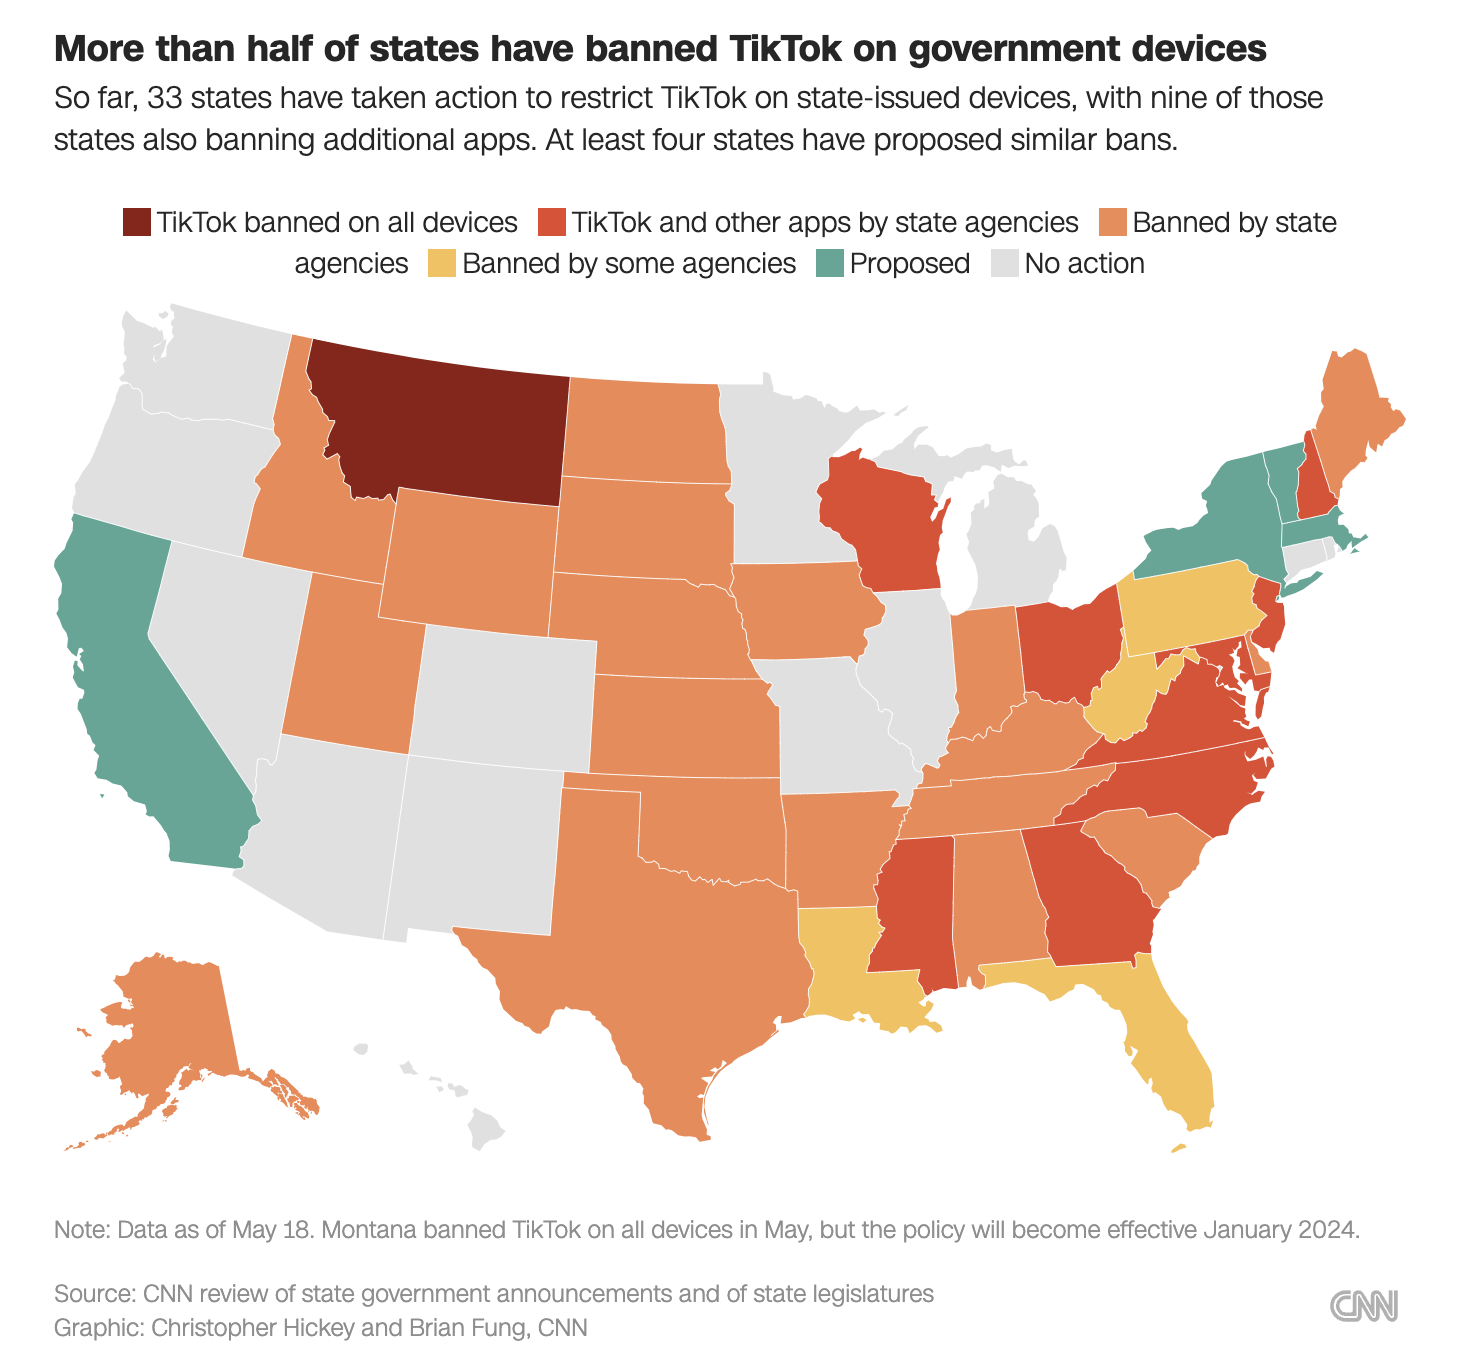 Map showing more than half of states have banned TikTok on government devices